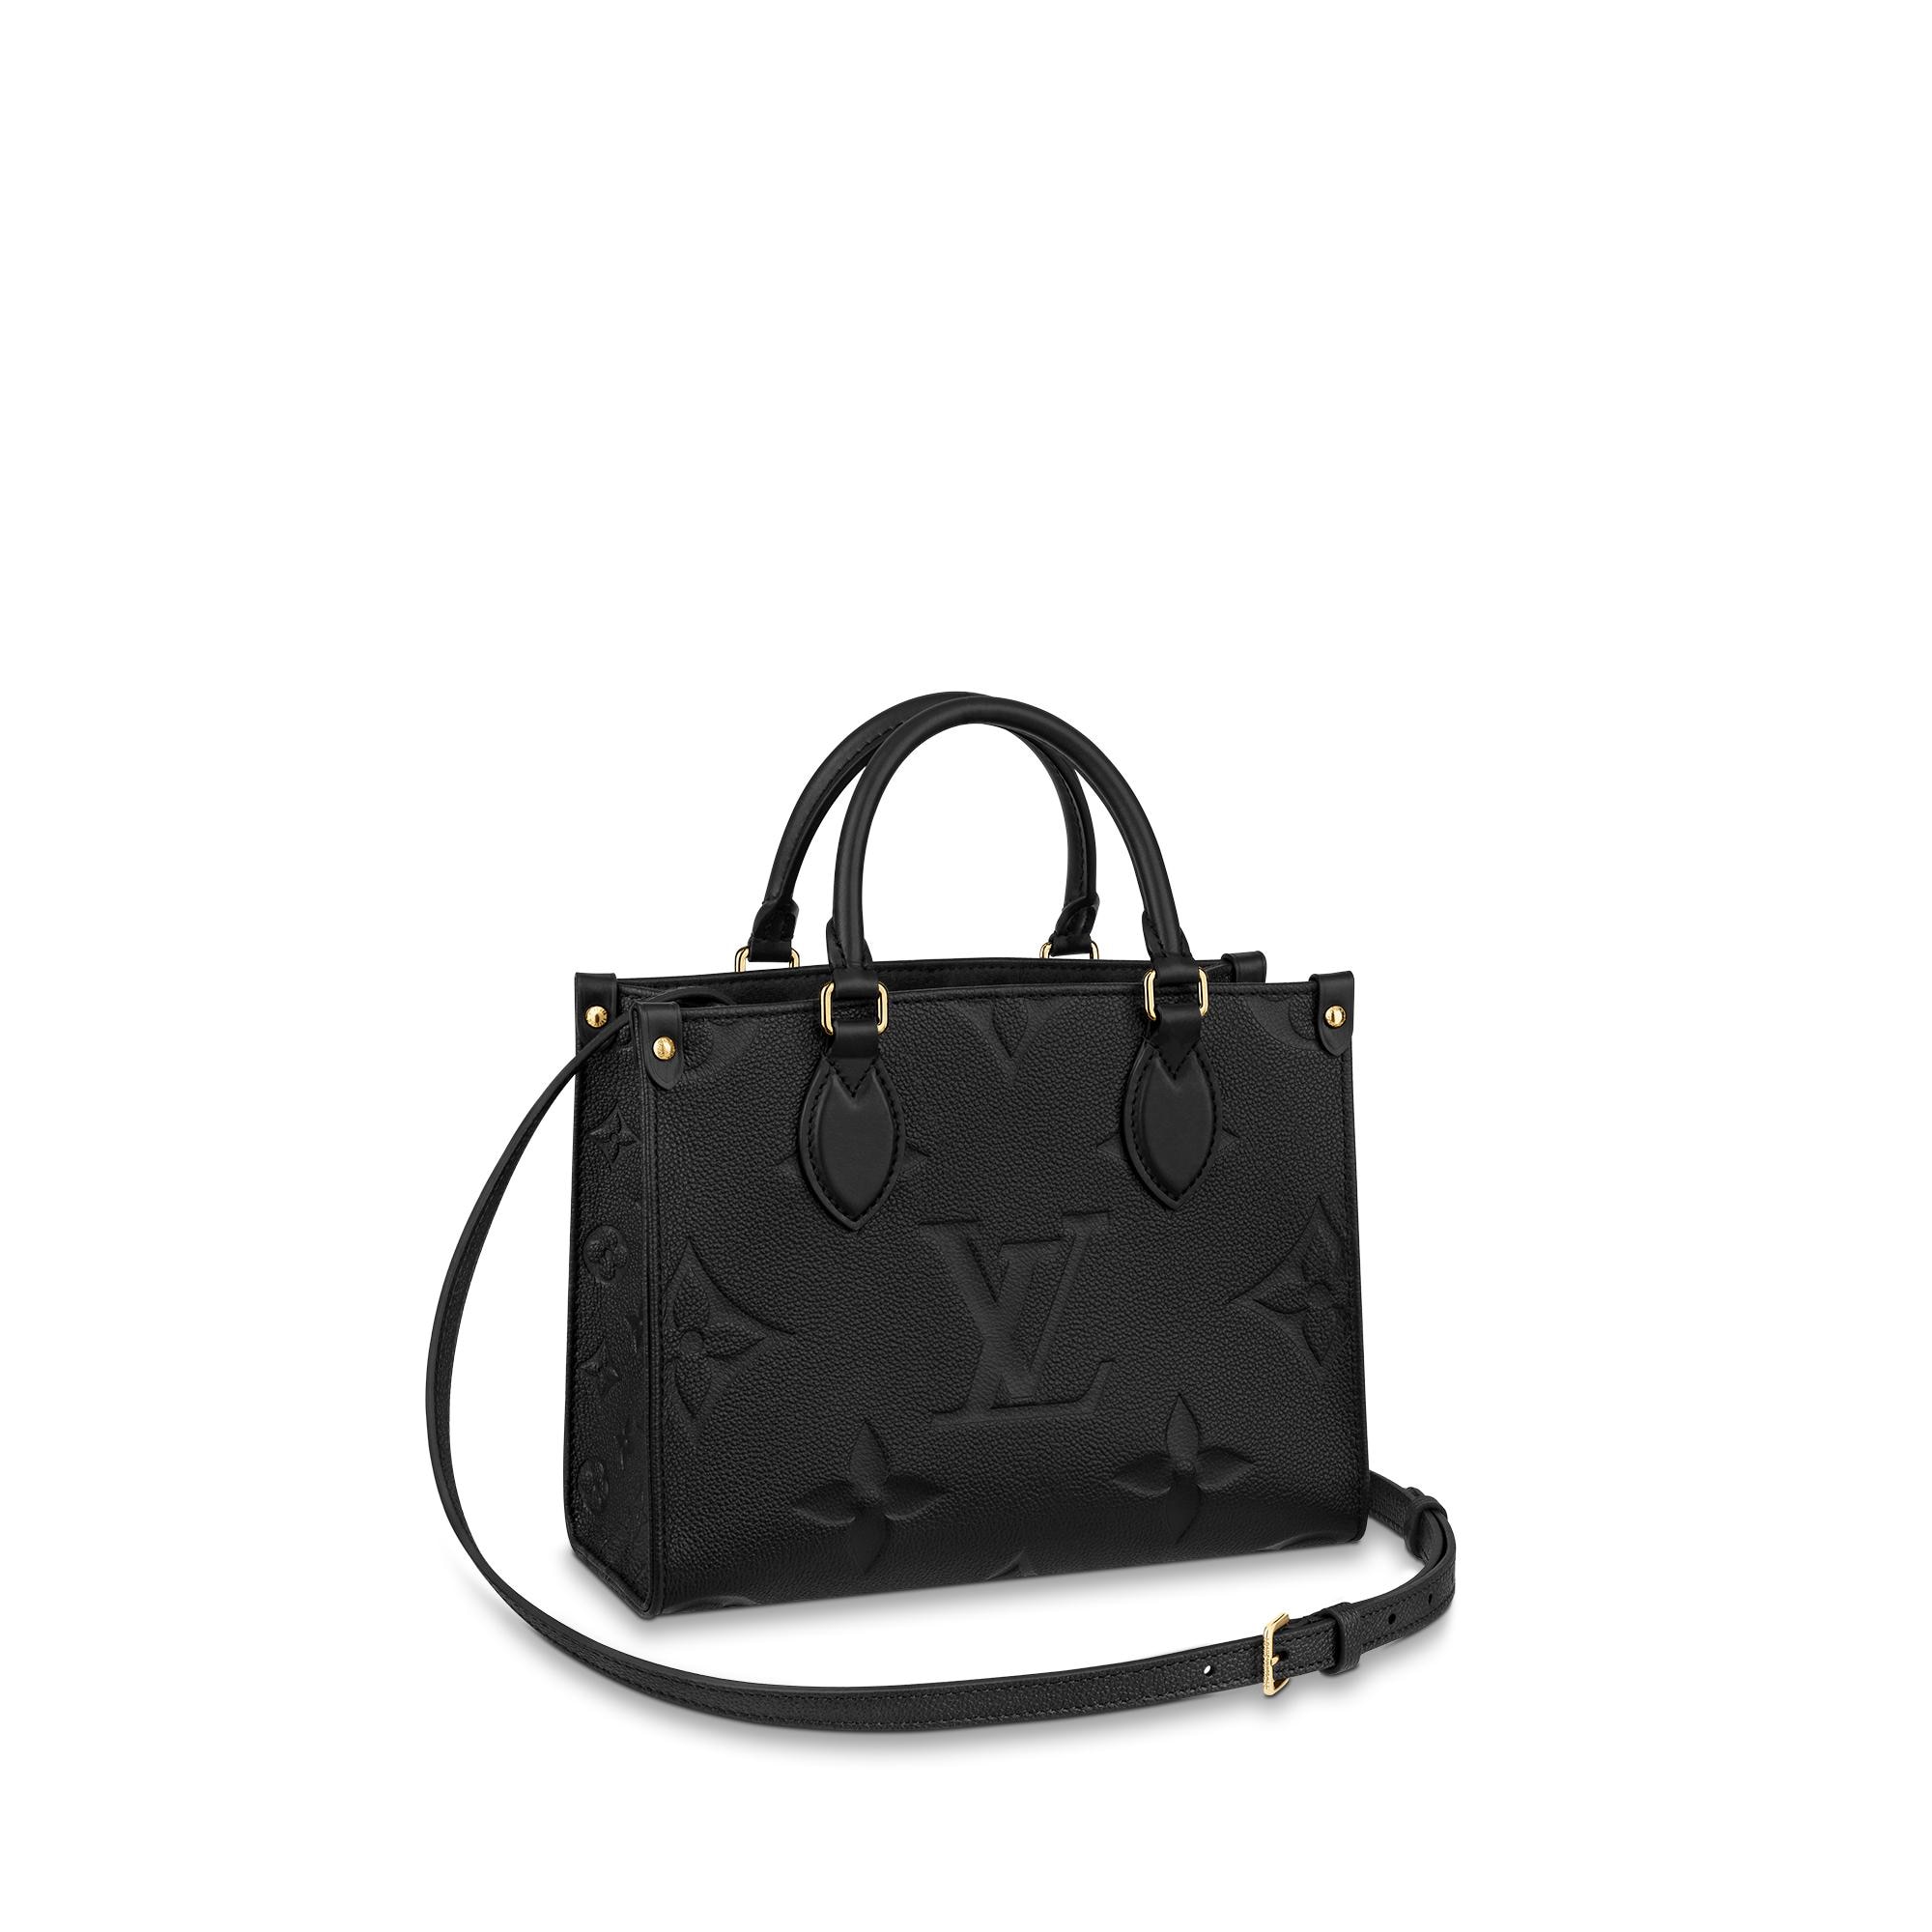 Onthego leather handbag Louis Vuitton Black in Leather - 35301563